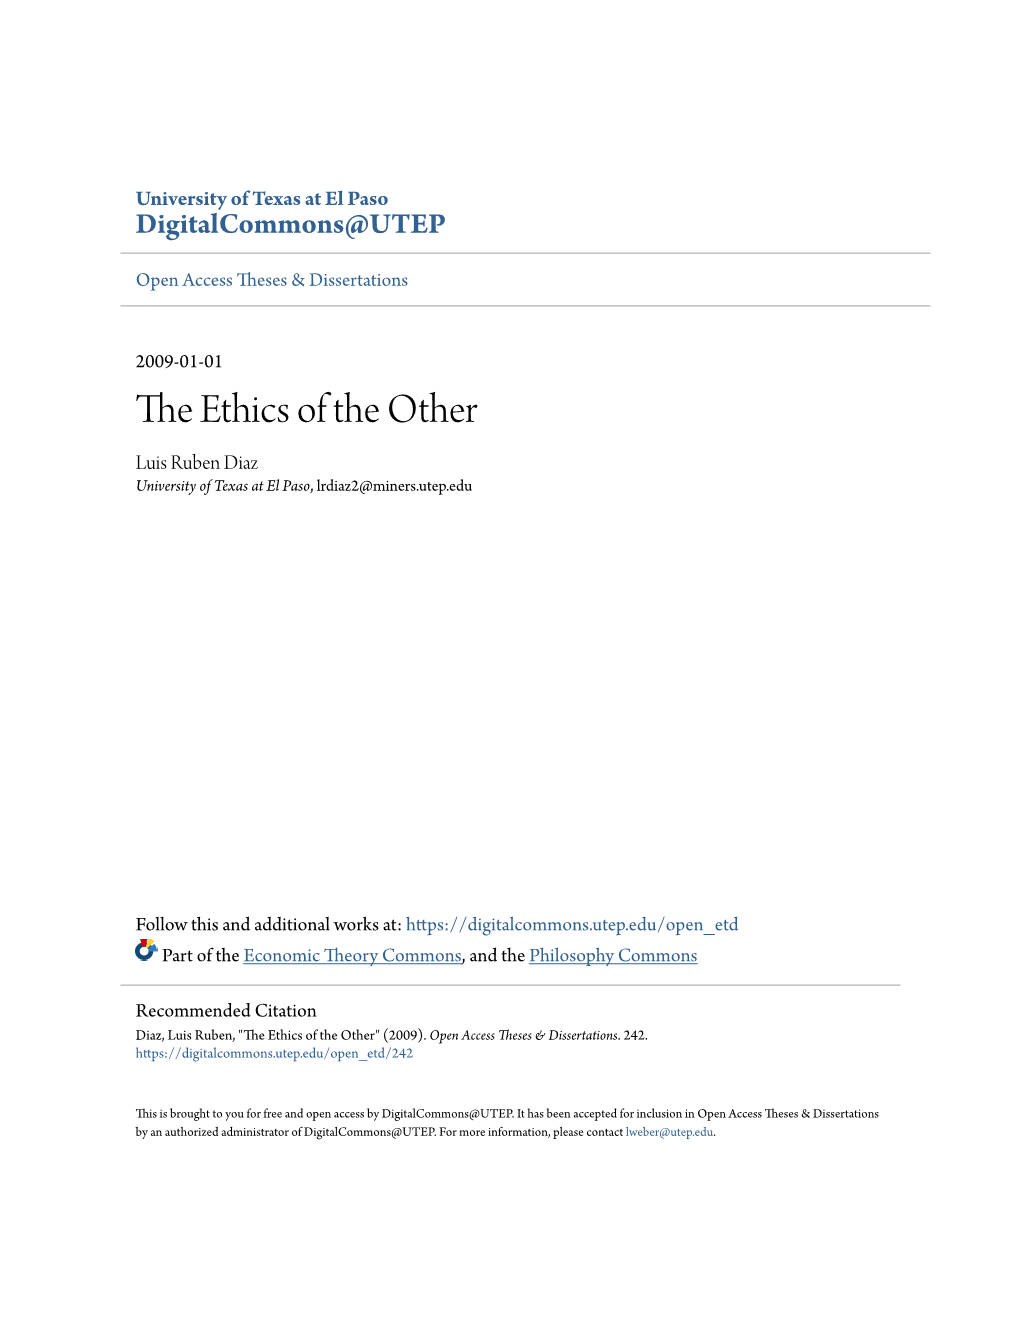 The Ethics of the Other